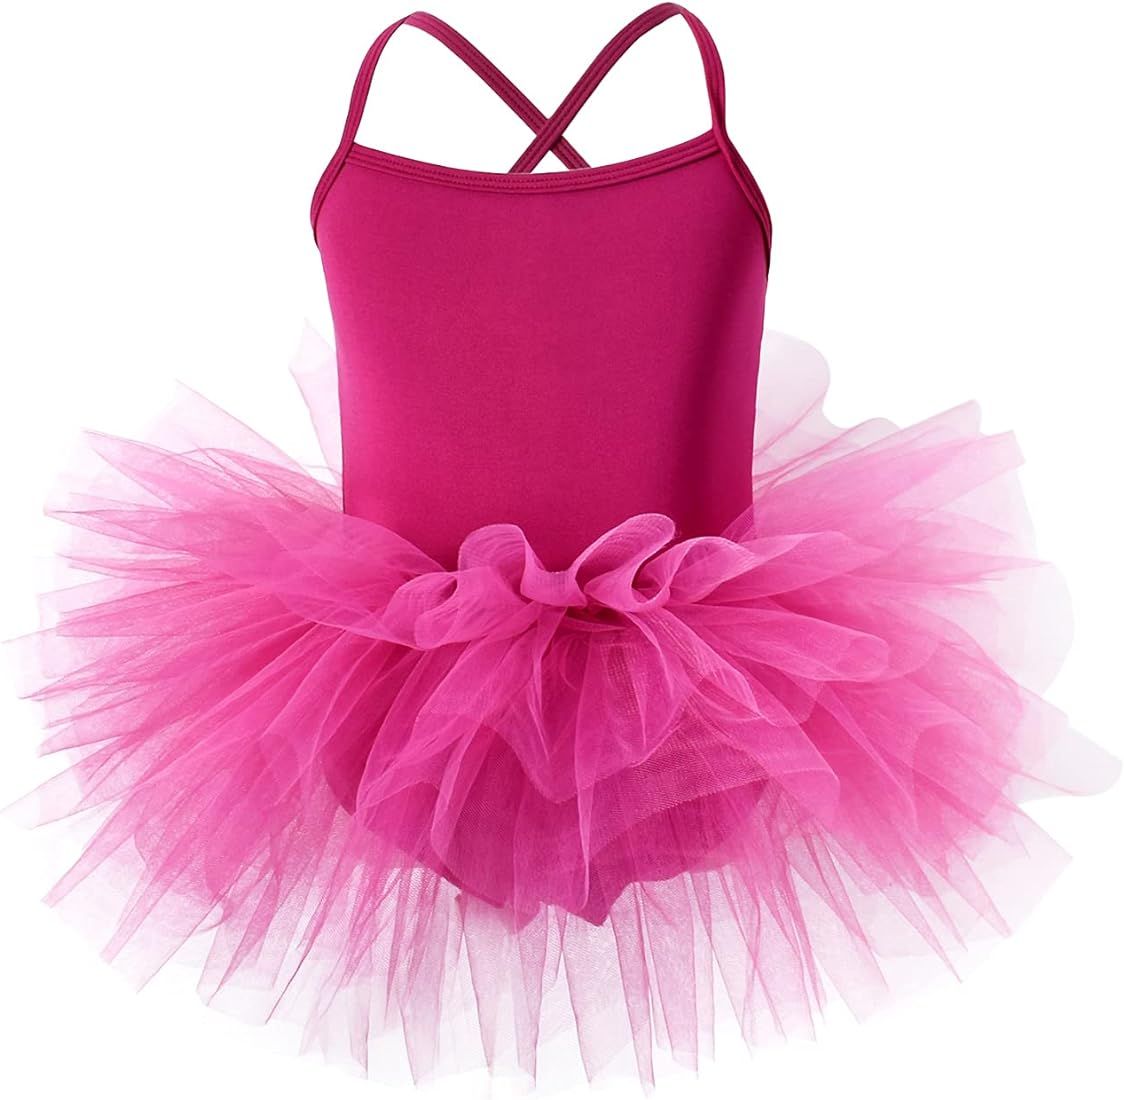 Toddler Girls Ballet Skirted Leotards Strap Tutu Dress Party Costumes for Dance 18Months to 7t | Amazon (US)